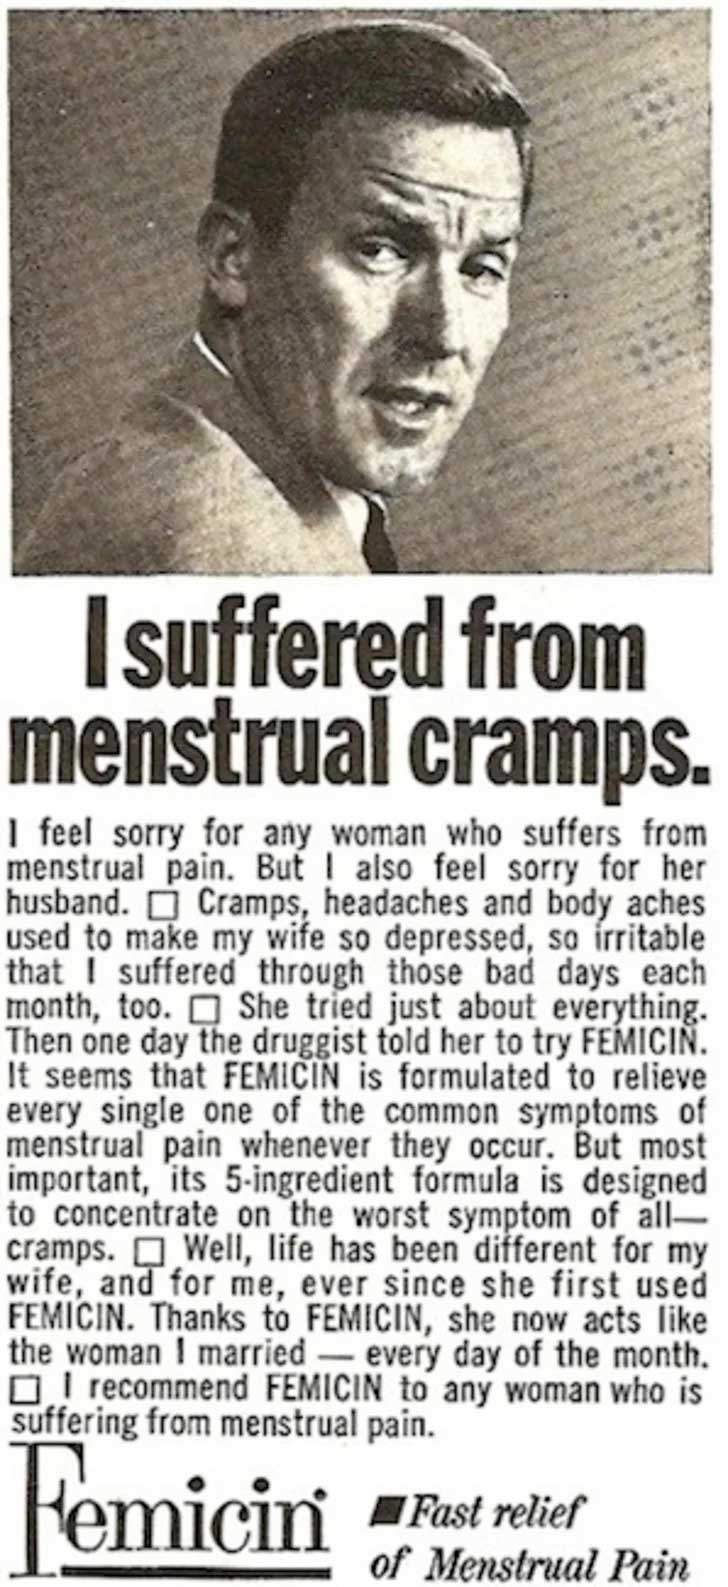 A vintage ad of a man promoting FEMICIN which is a medicine for menstrual symptoms